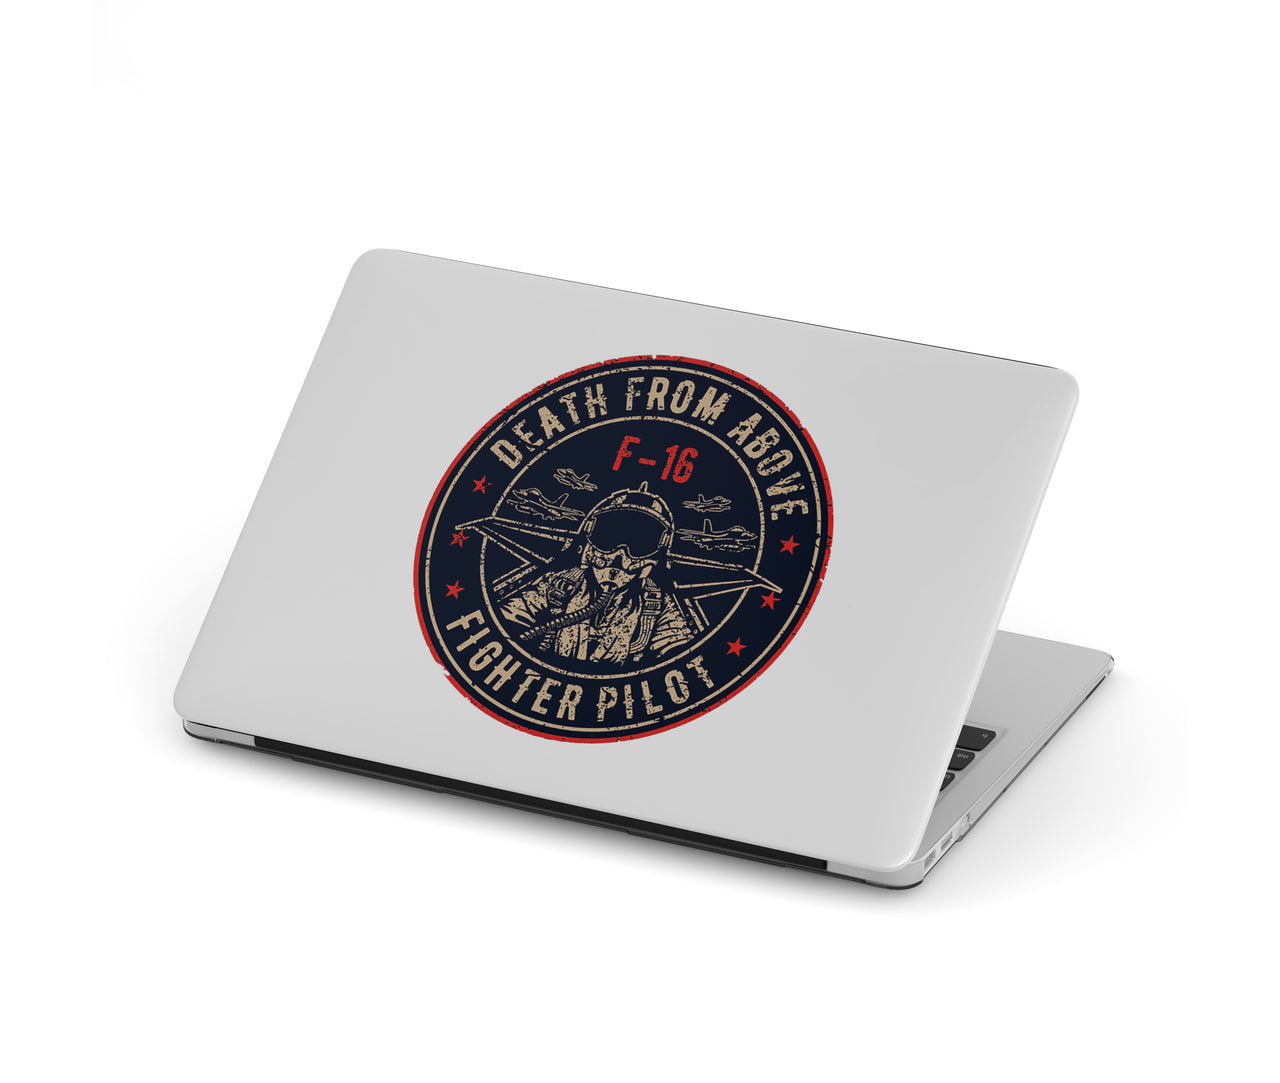 Fighting Falcon F16 - Death From Above Designed Macbook Cases